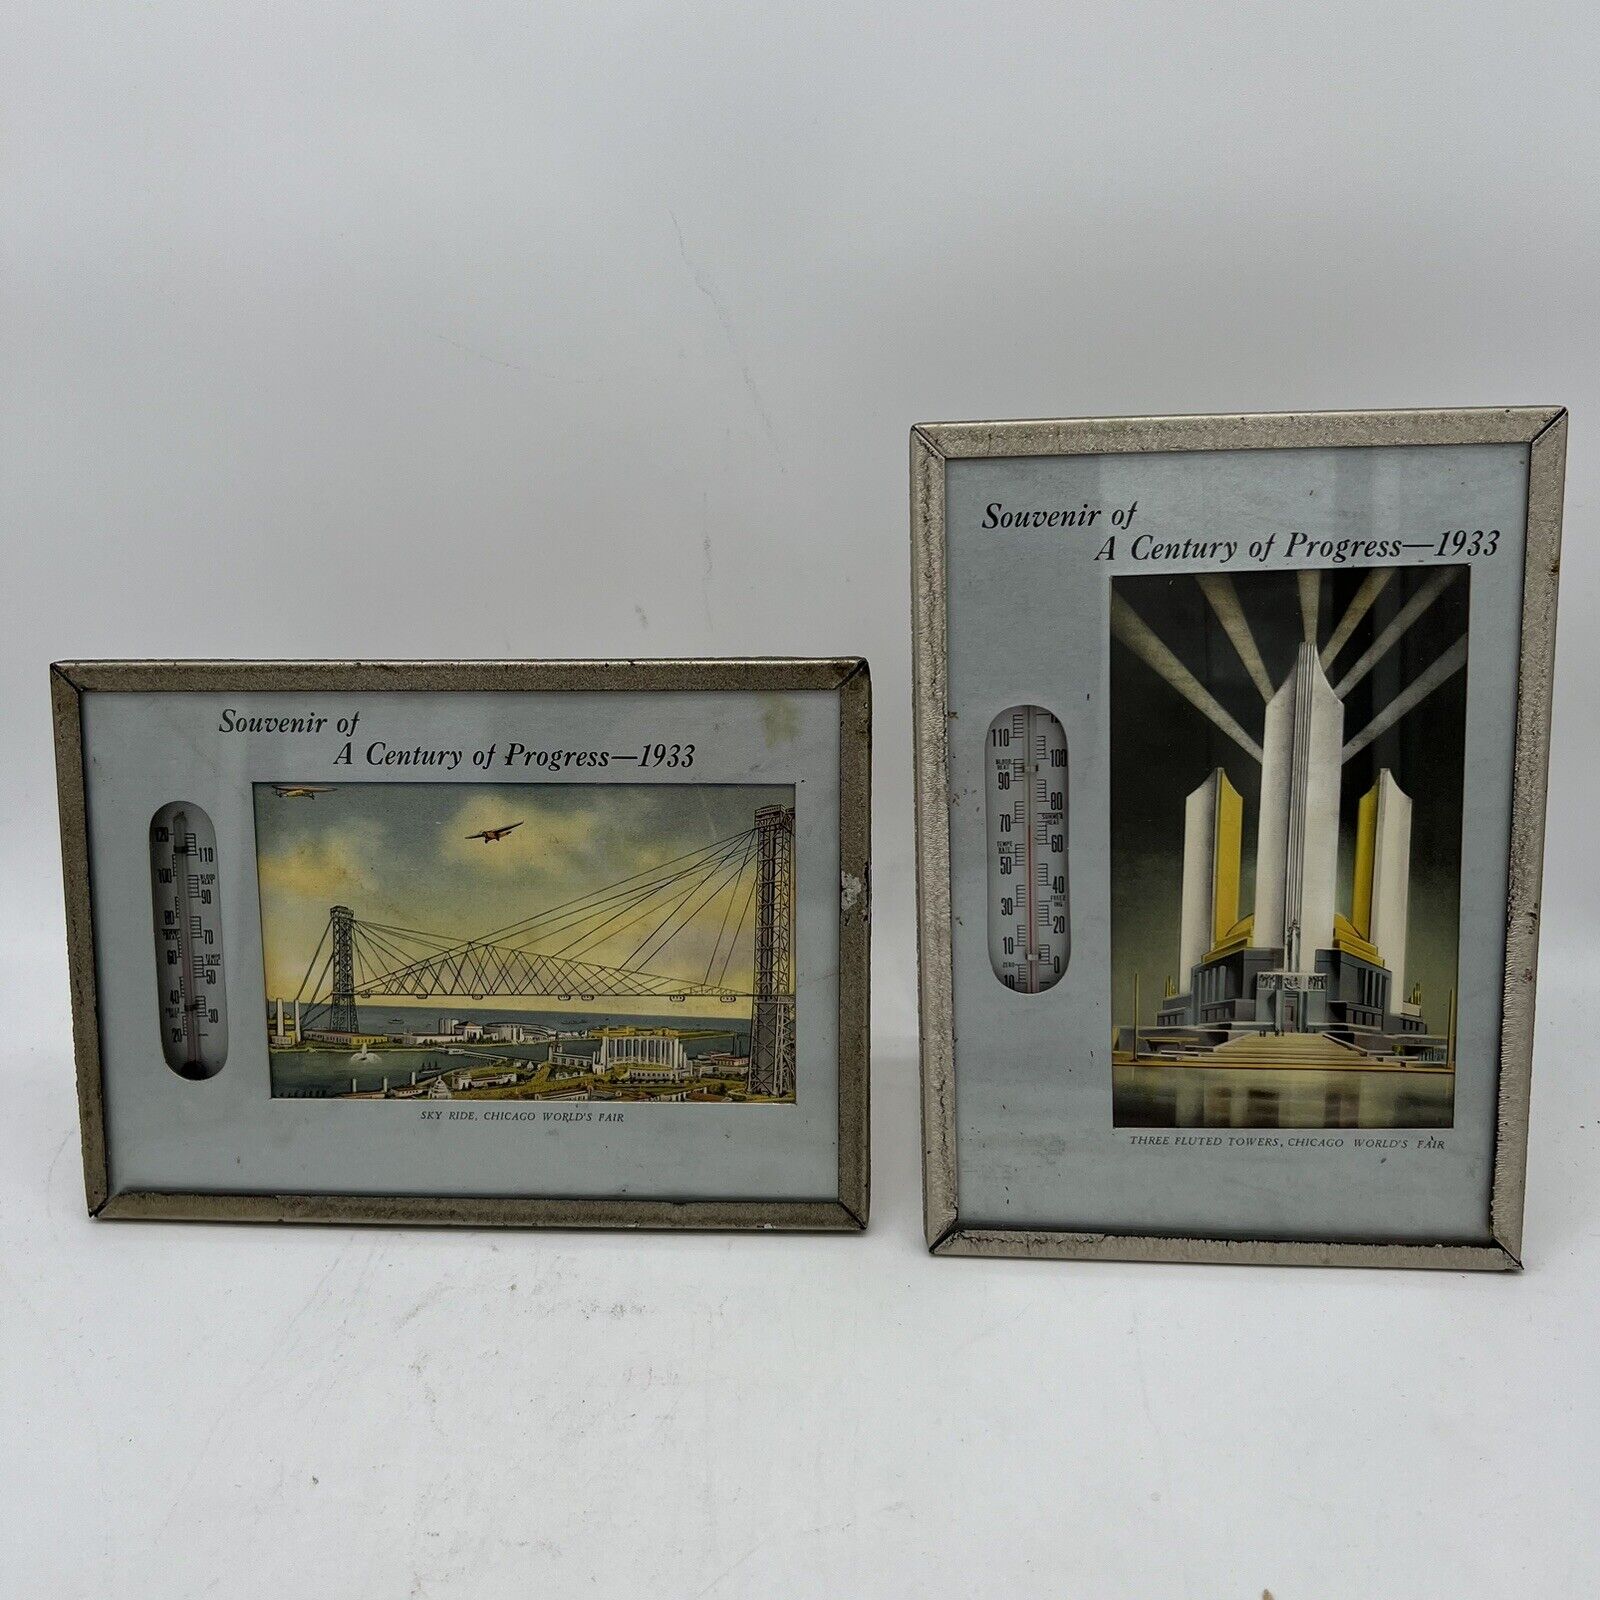 1933 CHICAGO WORLD FAIR,SKY RIDE, And Three Towers SOUVENIRS in METAL FRAMES.